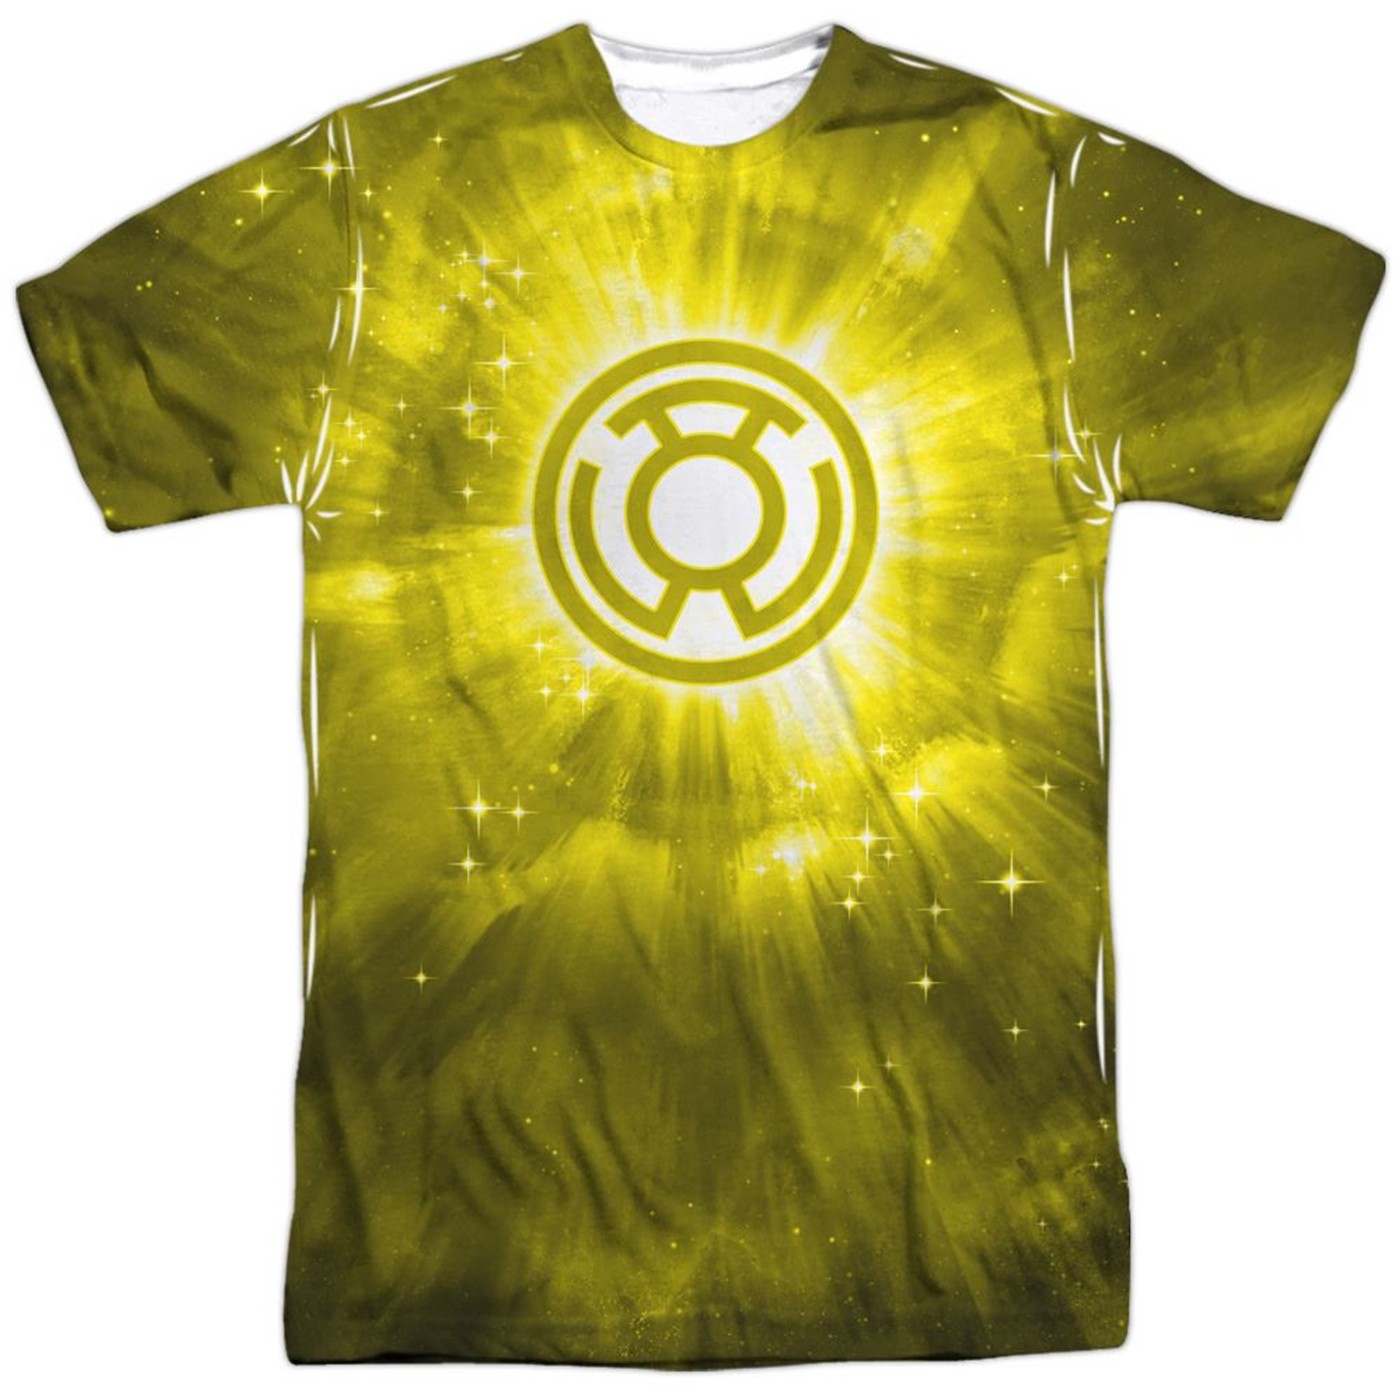 Green Lantern Yellow Energy Symbol Sublimated Front and Back Men's T-Shirt